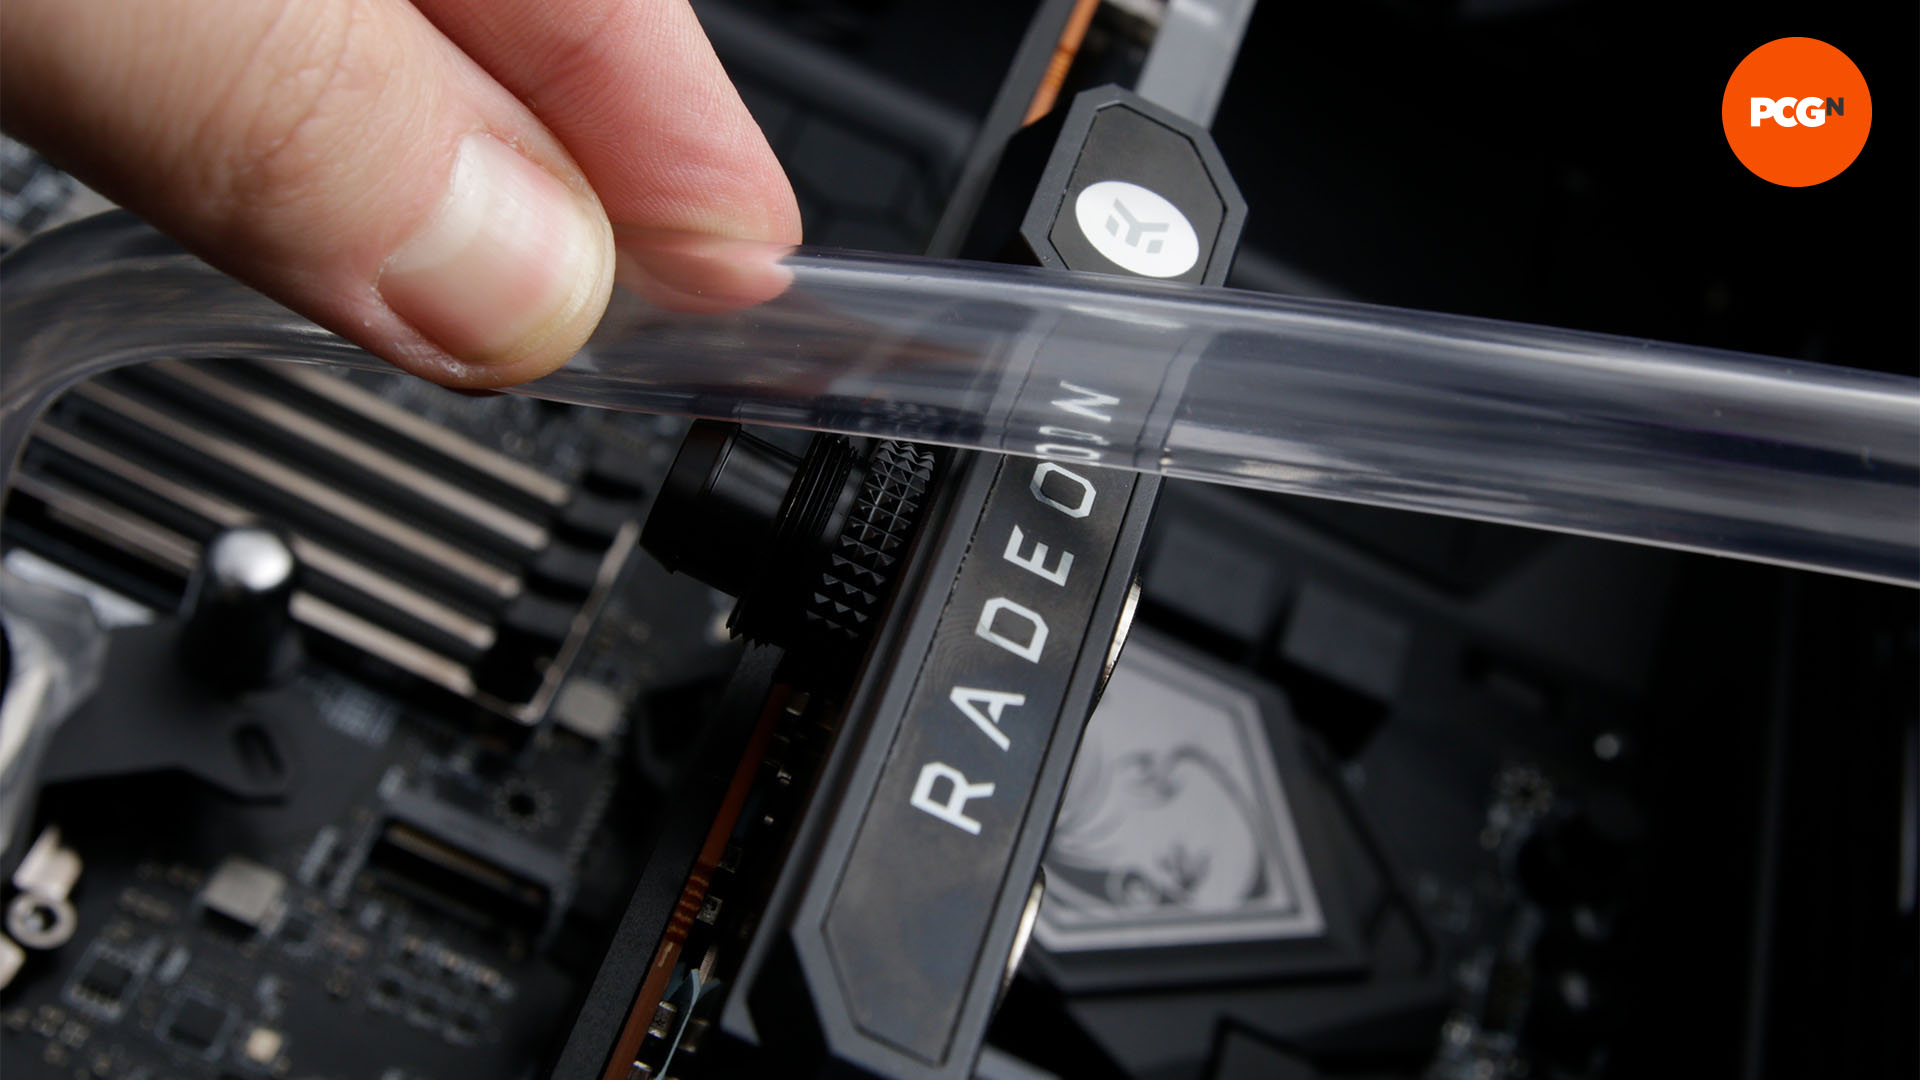 How to water cool your PC: Route your tubing to the GPU waterblock